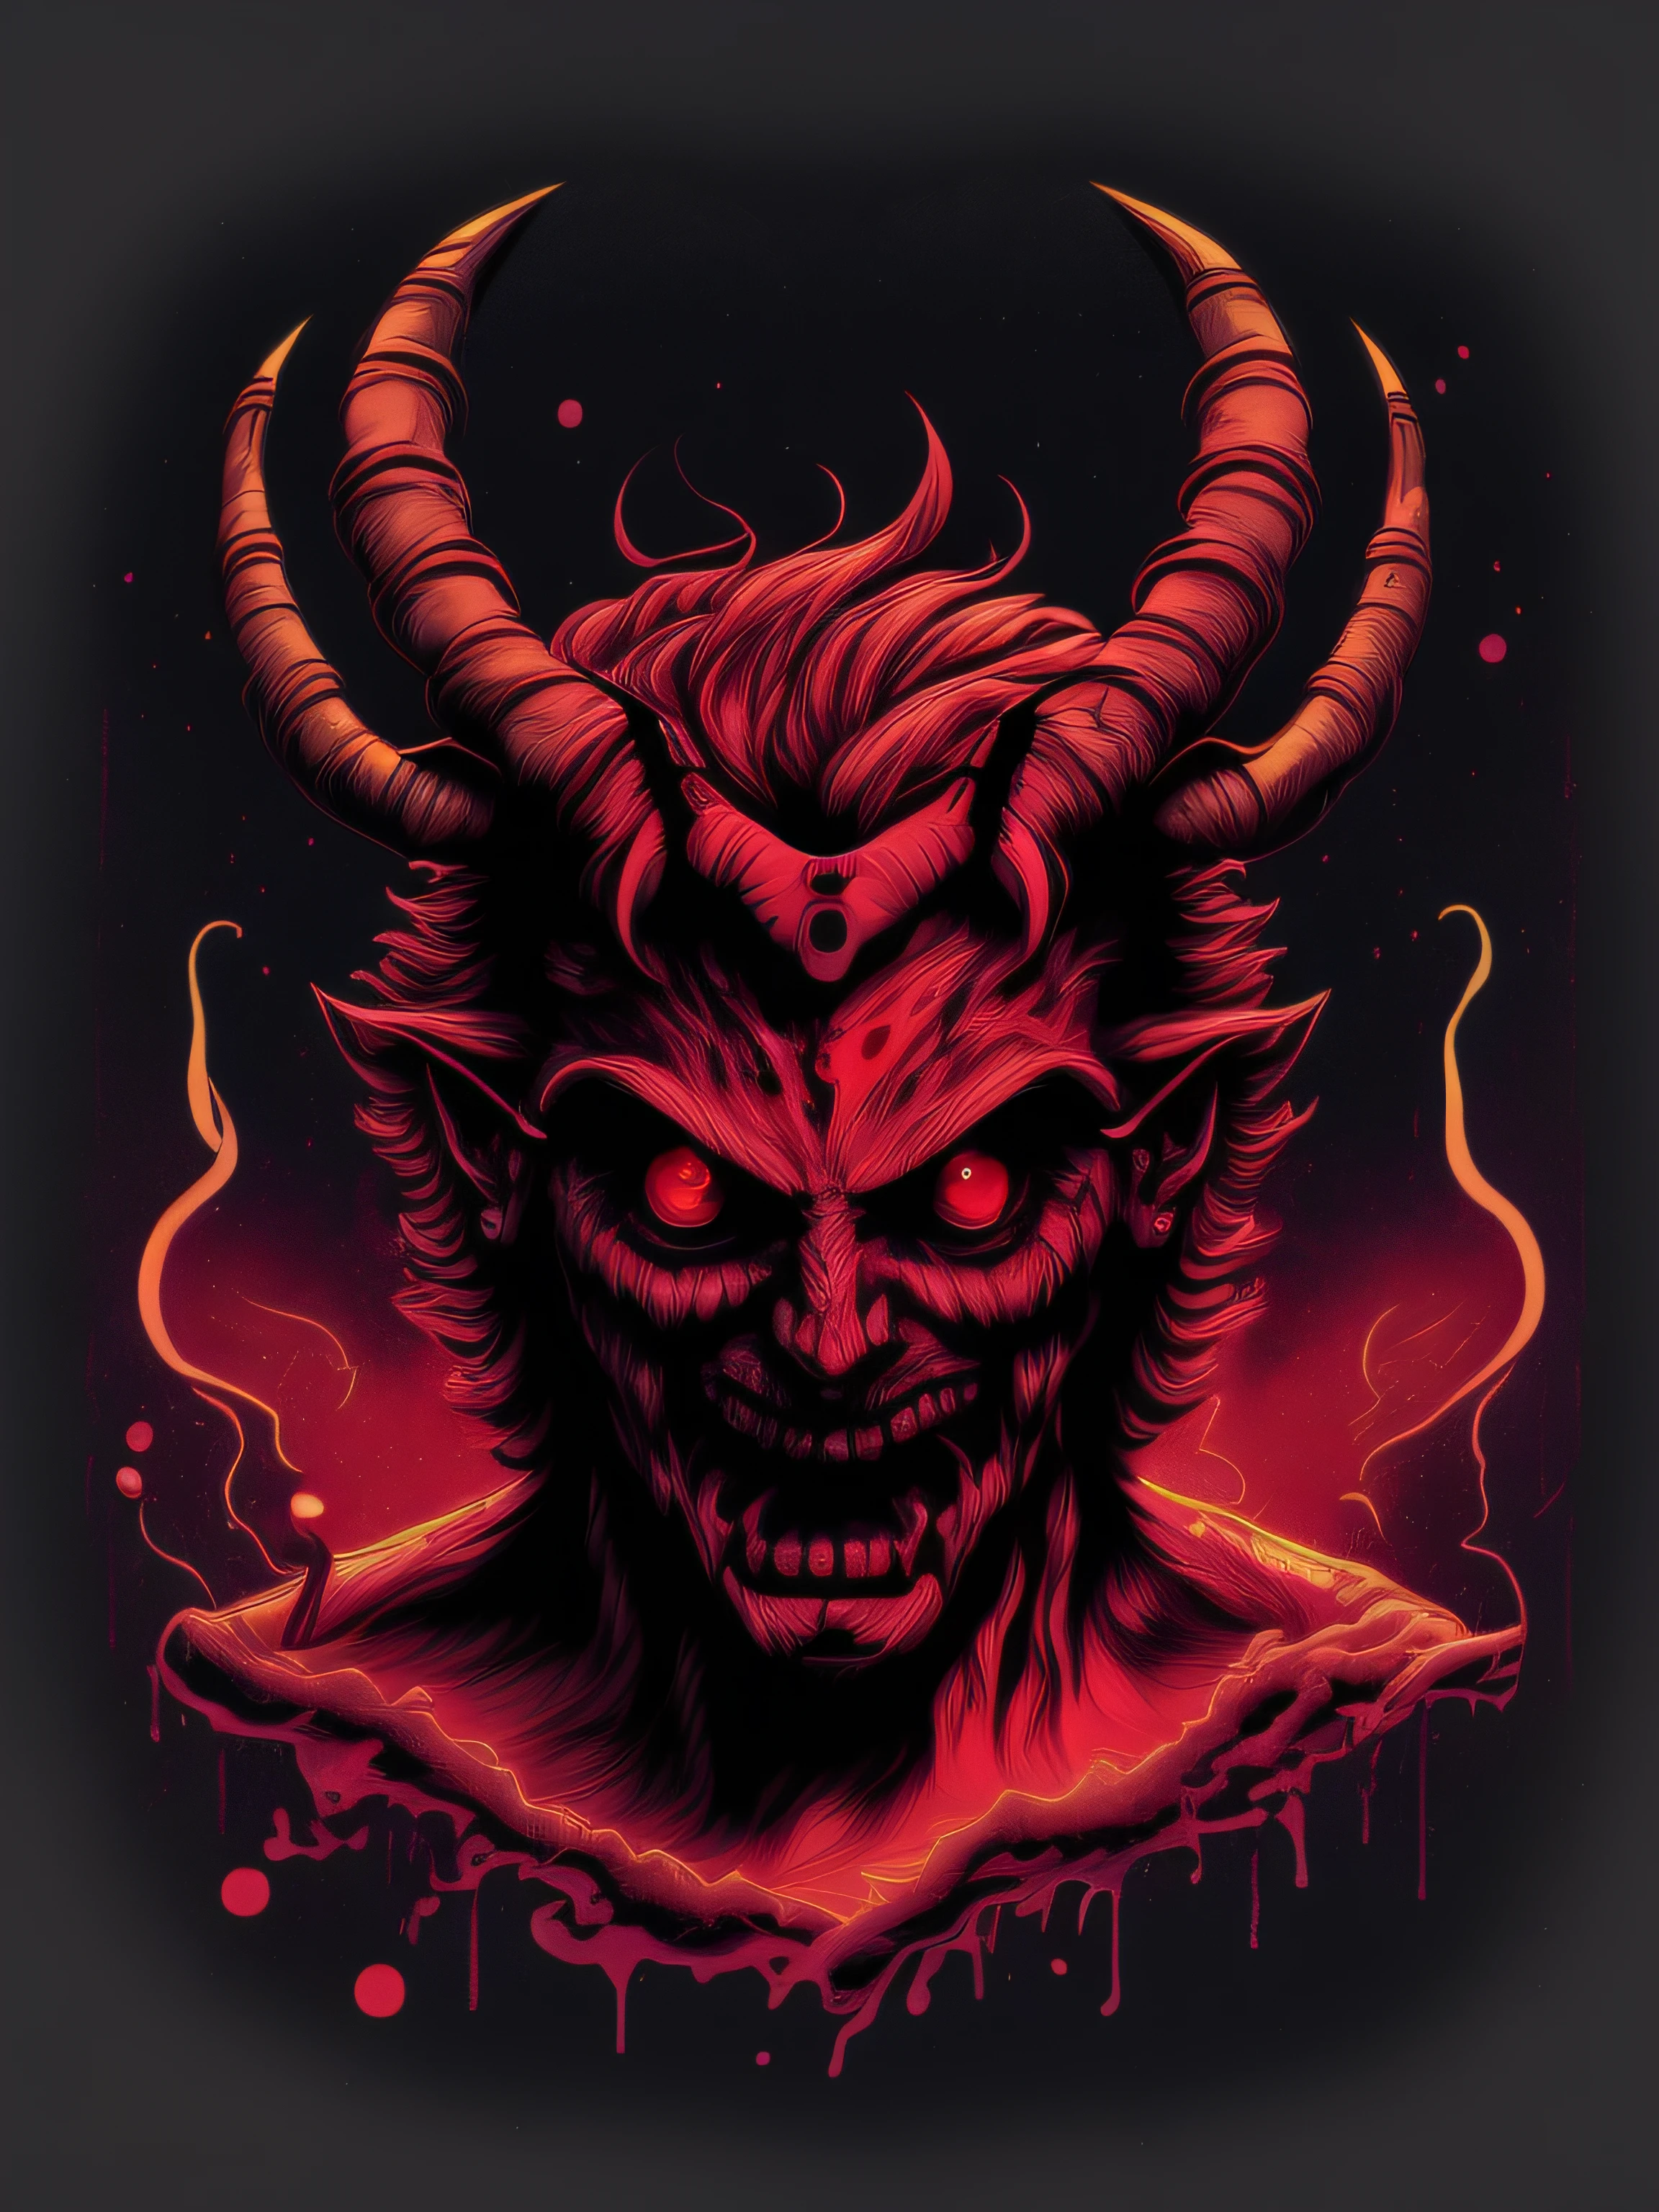 the high detailed t-shirt vector illustration of the appalling face of the Satan, ,frightening, fearsome, t-shirt design, neon red color , dark splash, dark, ghotic, t-shirt design, in the style of Studio Ghibli, pastel tetradic colors, 2D vector art, cute and quirky, fantasy art, watercolor effect, bokeh, Adobe Illustrator, hand-drawn, digital painting, low-poly, soft lighting, bird's-eye view, isometric style, retro aesthetic, focused on the character, 4K resolution, photorealistic rendering, using Cinema 4D